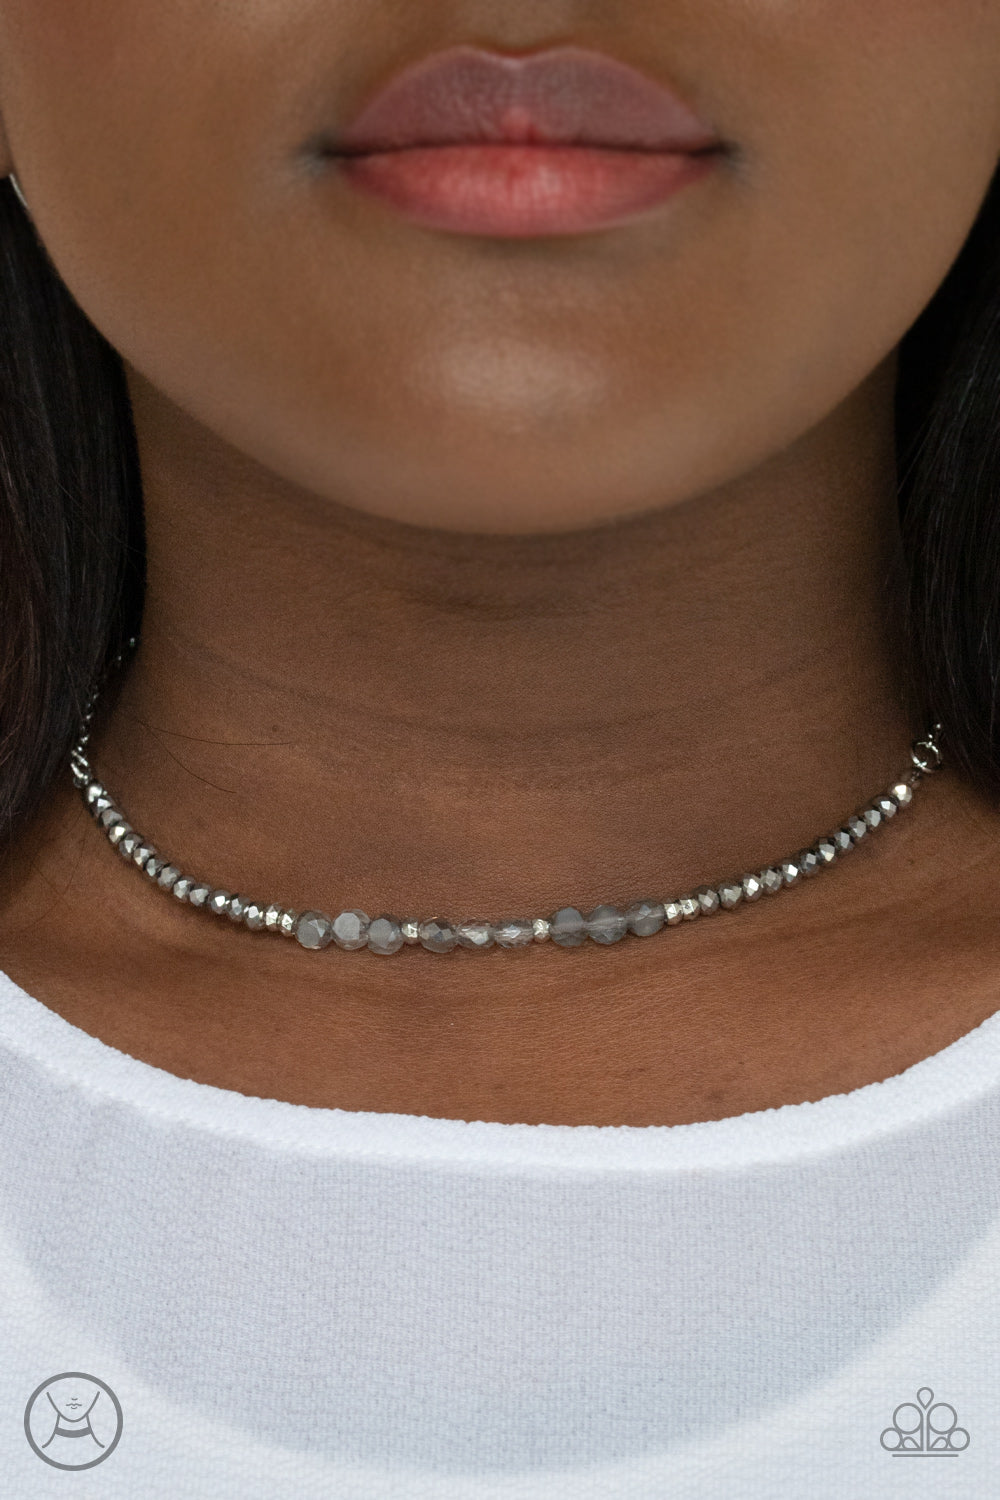 Paparazzi Necklaces - Space Odyssey - Silver Choker